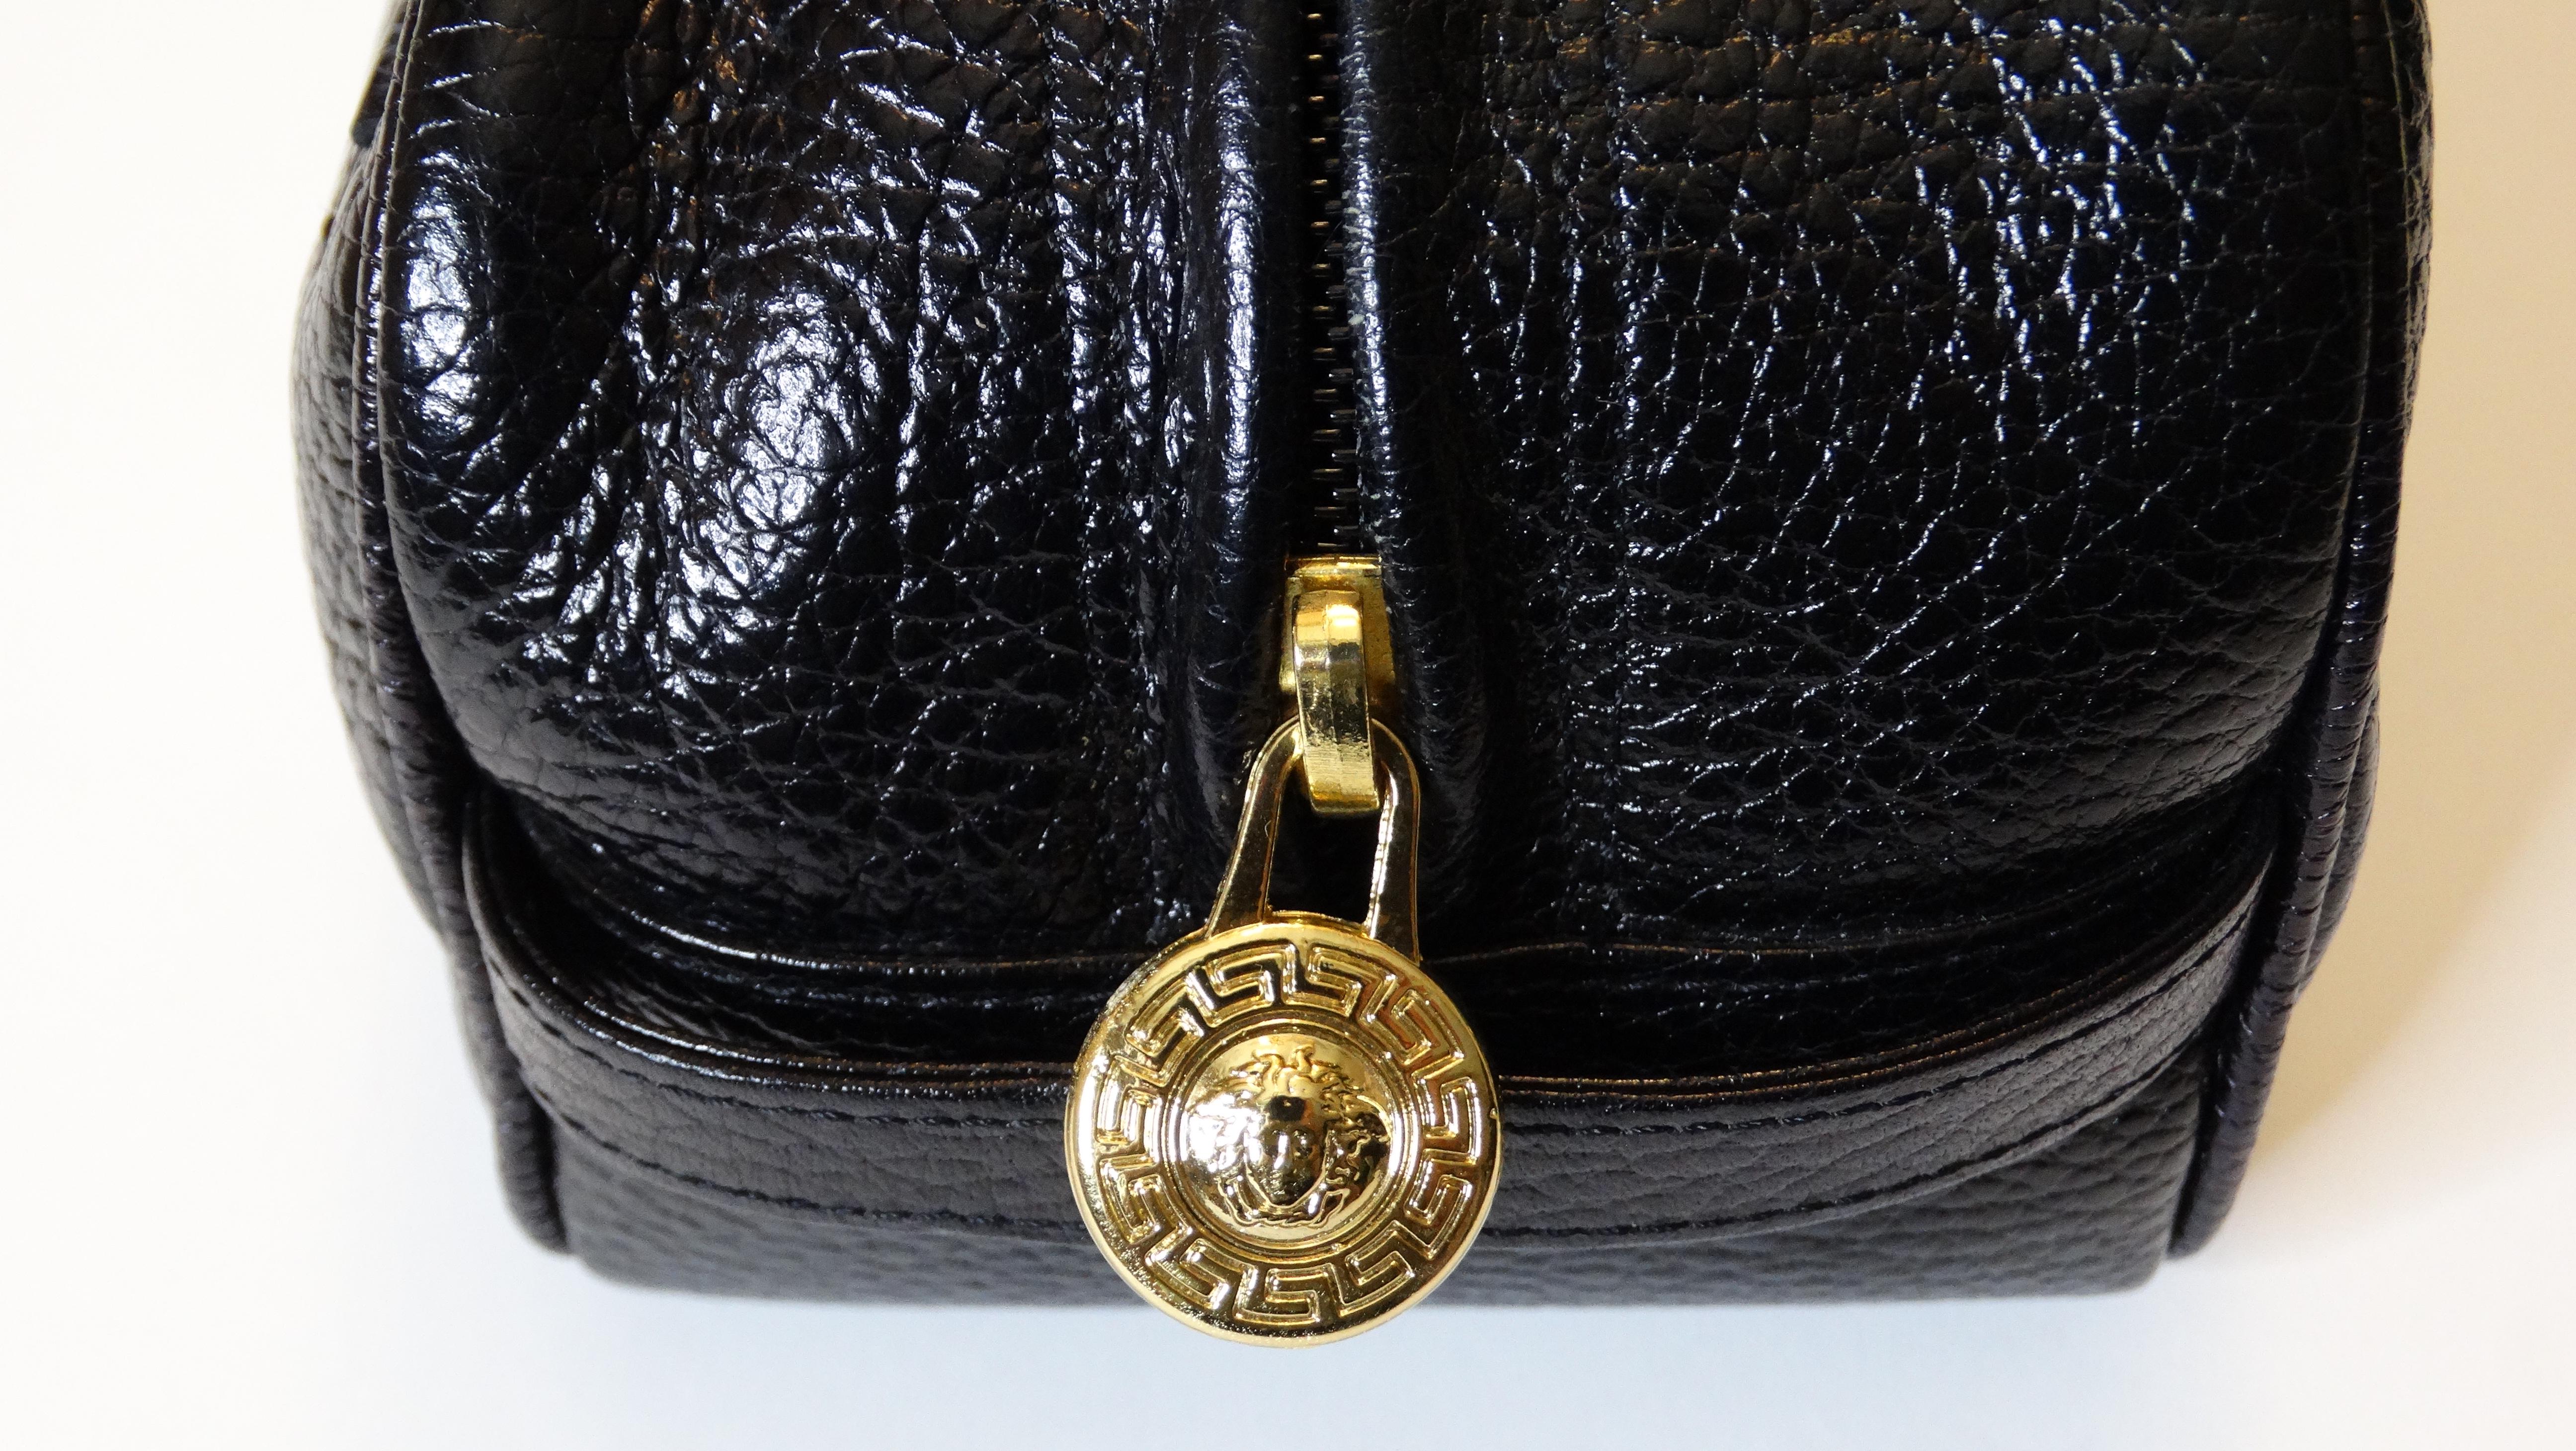 Travel in style with this Gianni Versace cosmetic bag! Circa 1990s, this cosmetic bag/clutch is crafted from black pebbled leather and features the signature Versace Medusa head embossed on the front. Includes two side straps, gold hardware and a